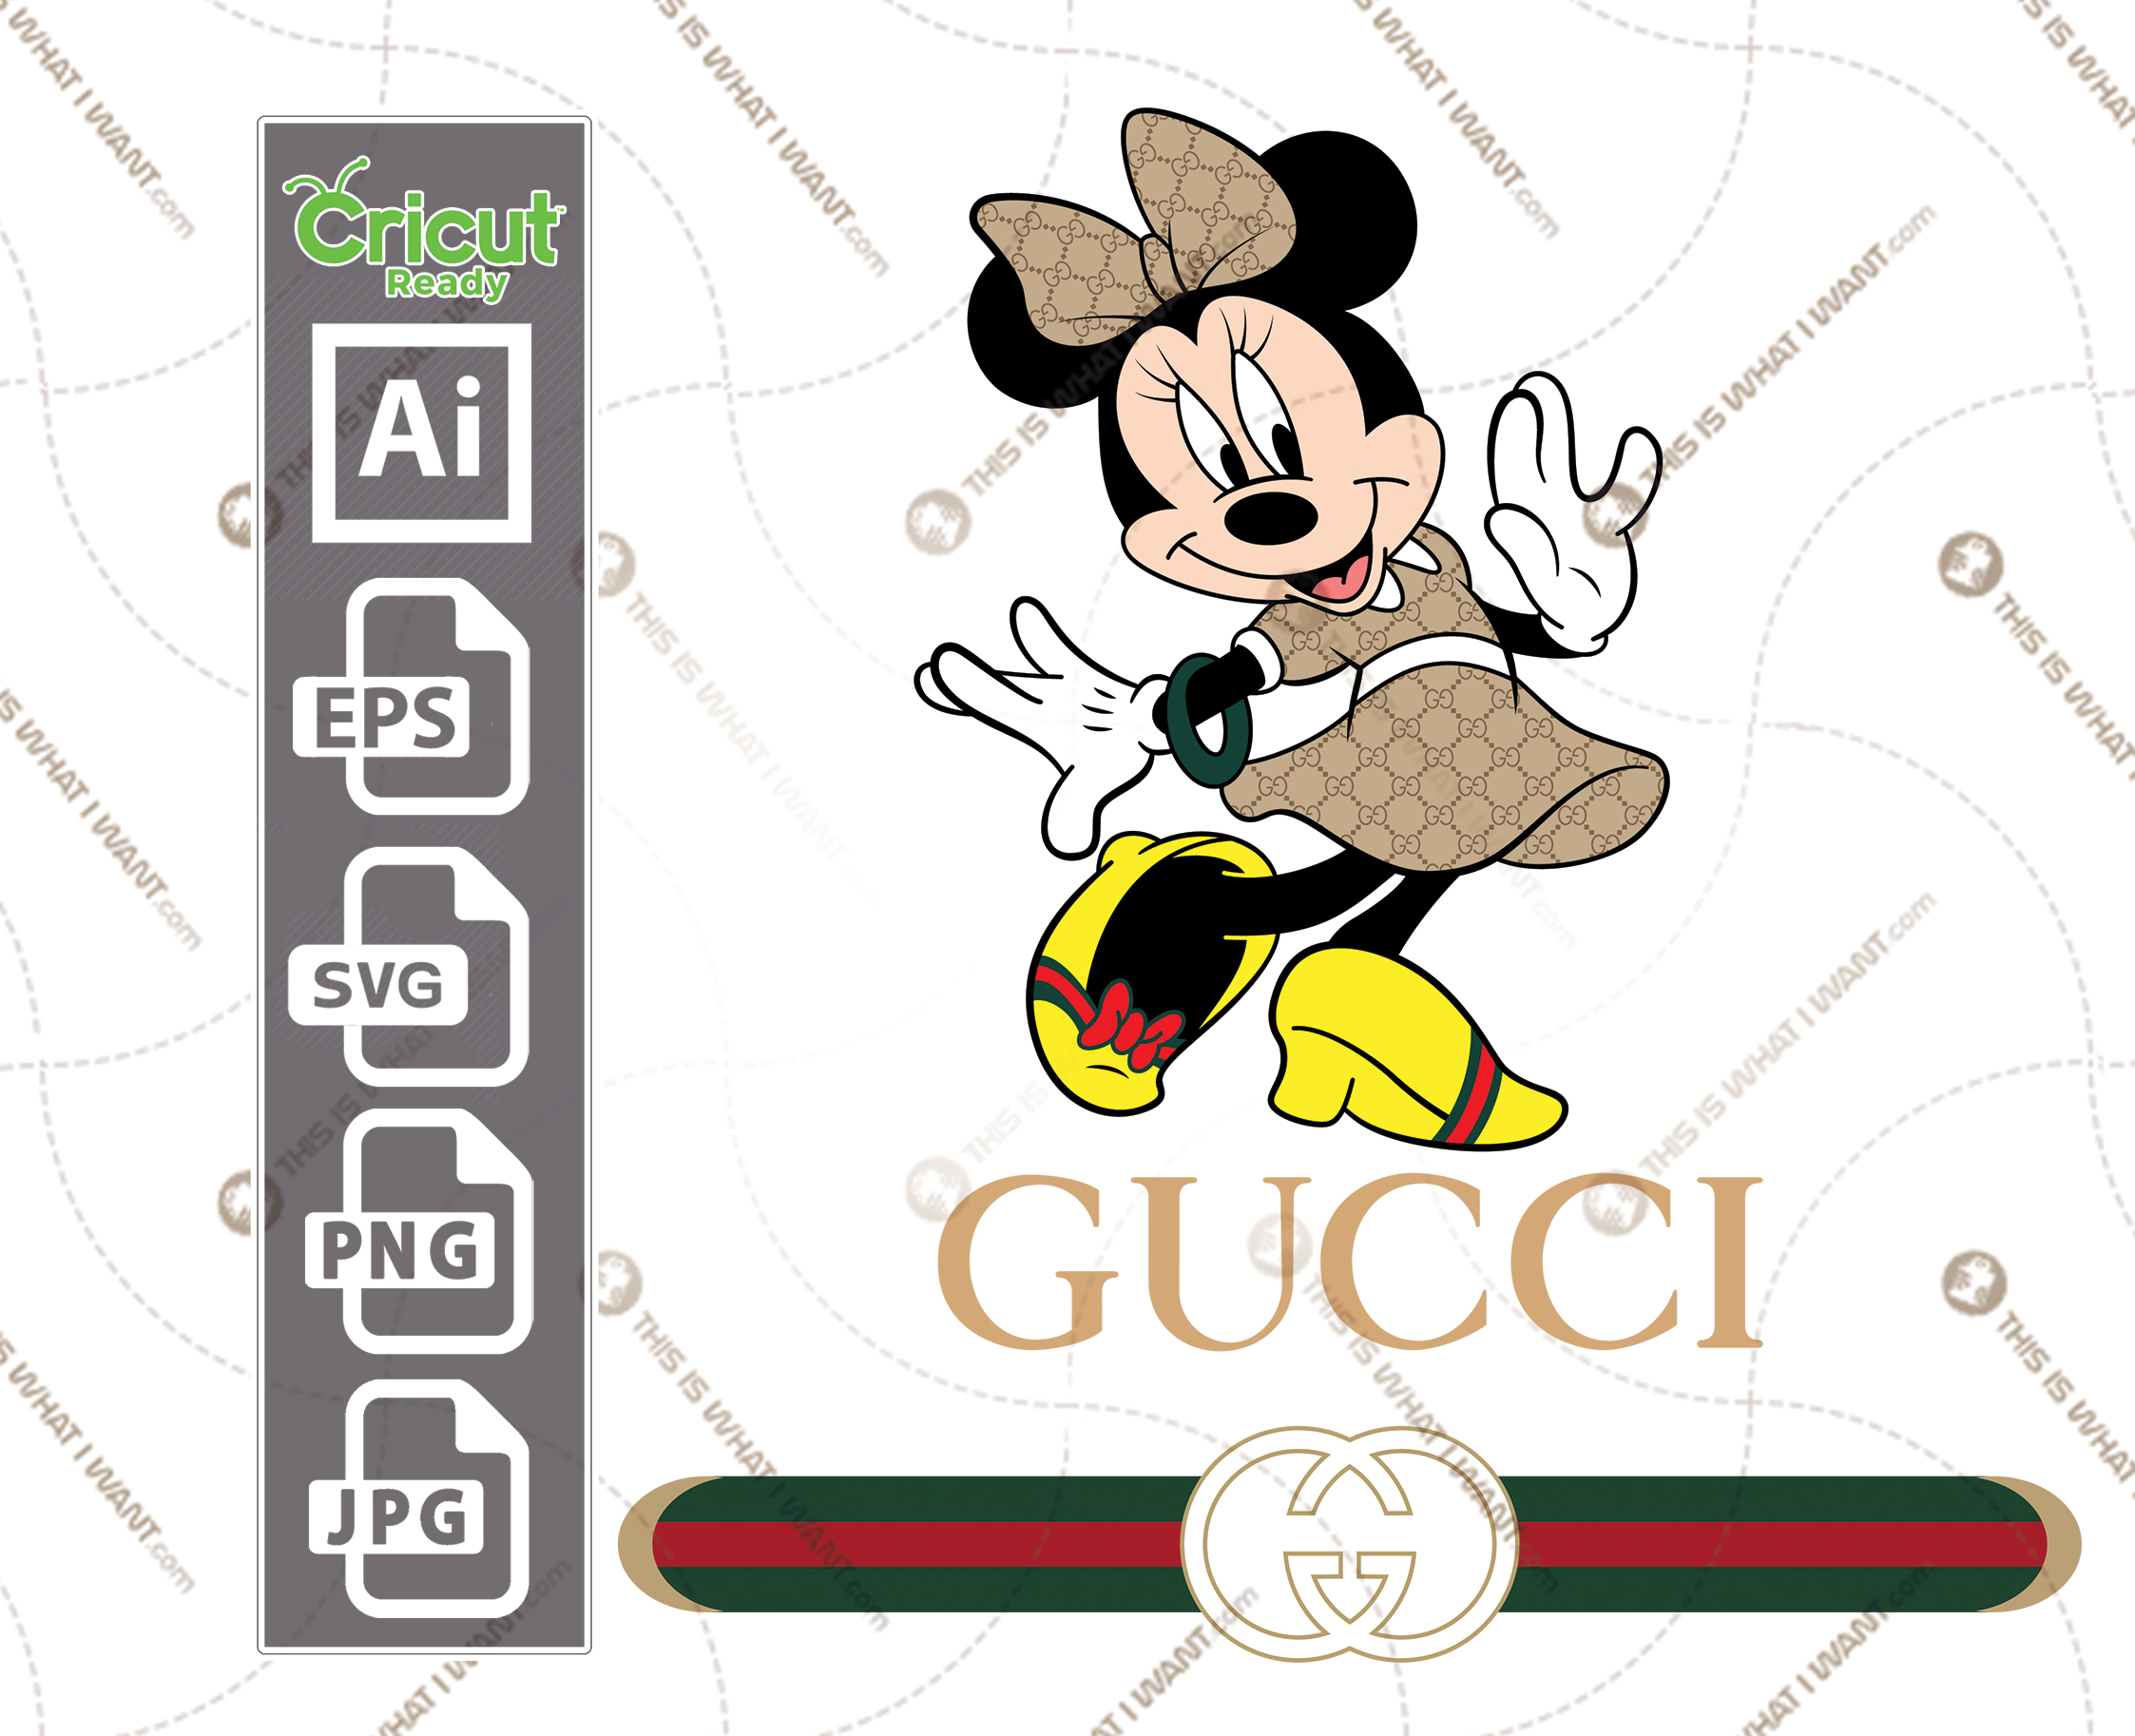 Gucci Minnie Mouse Inspired Vector Art Design Hi Quality Digital Downloadable Files Bundle Ai Svg Jpg Png Eps Cricut Ready This Is What I Want